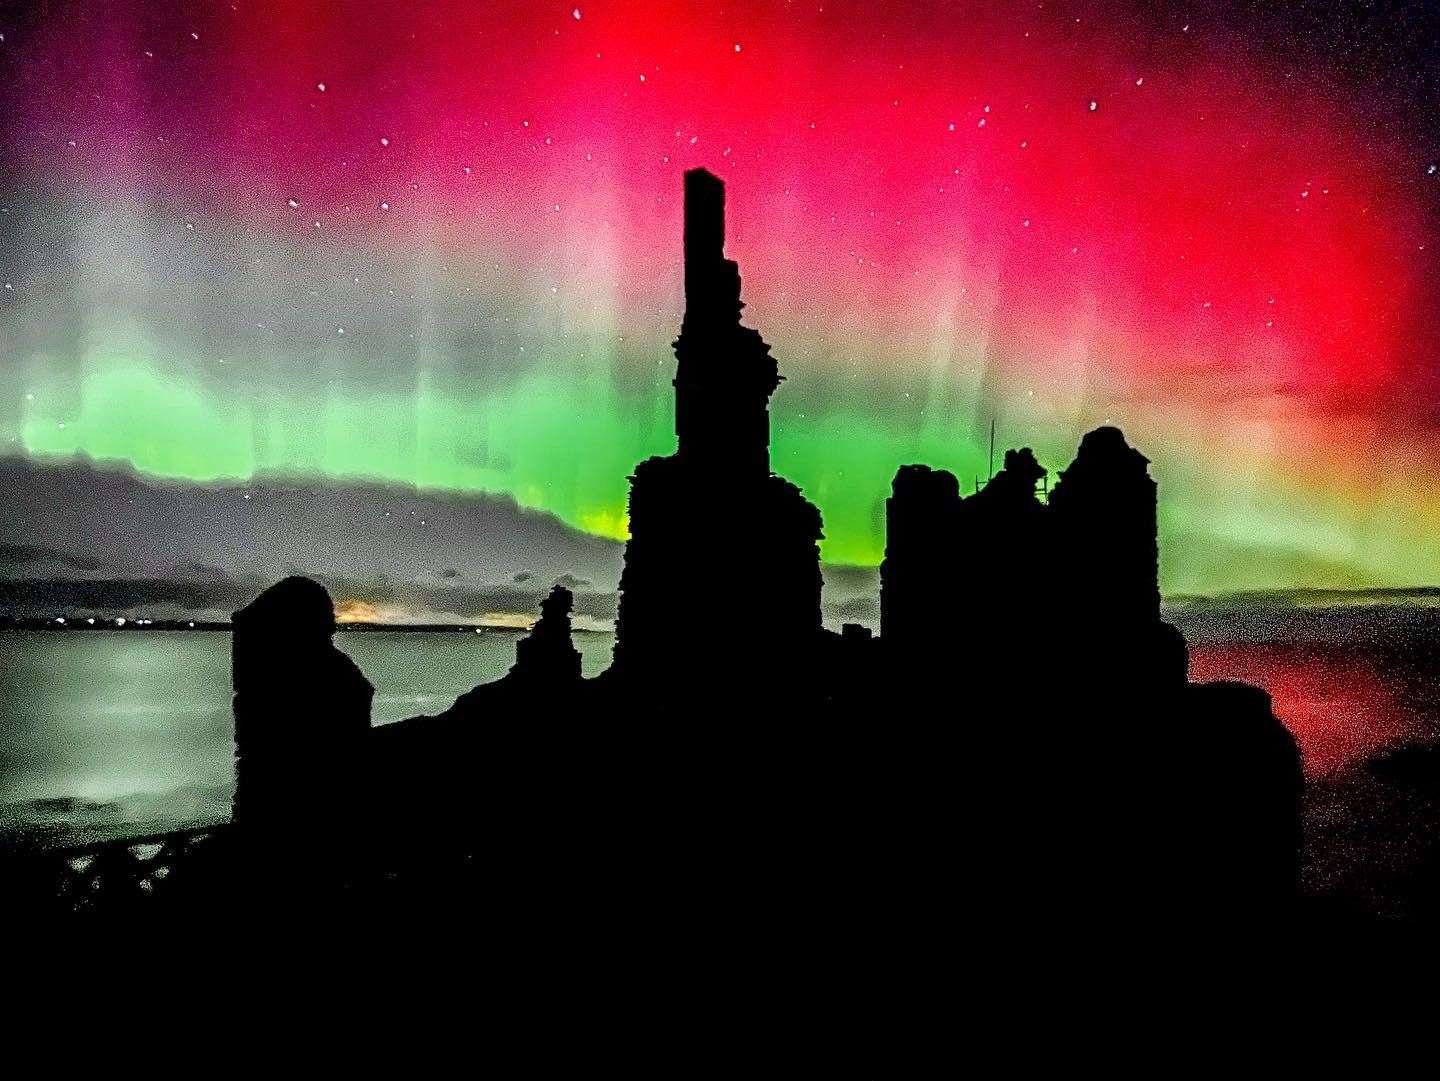 Northern Lights seen beyond a silhouette of Castle Sinclair Girnigoe, pictured by Paul Steven of Wick.